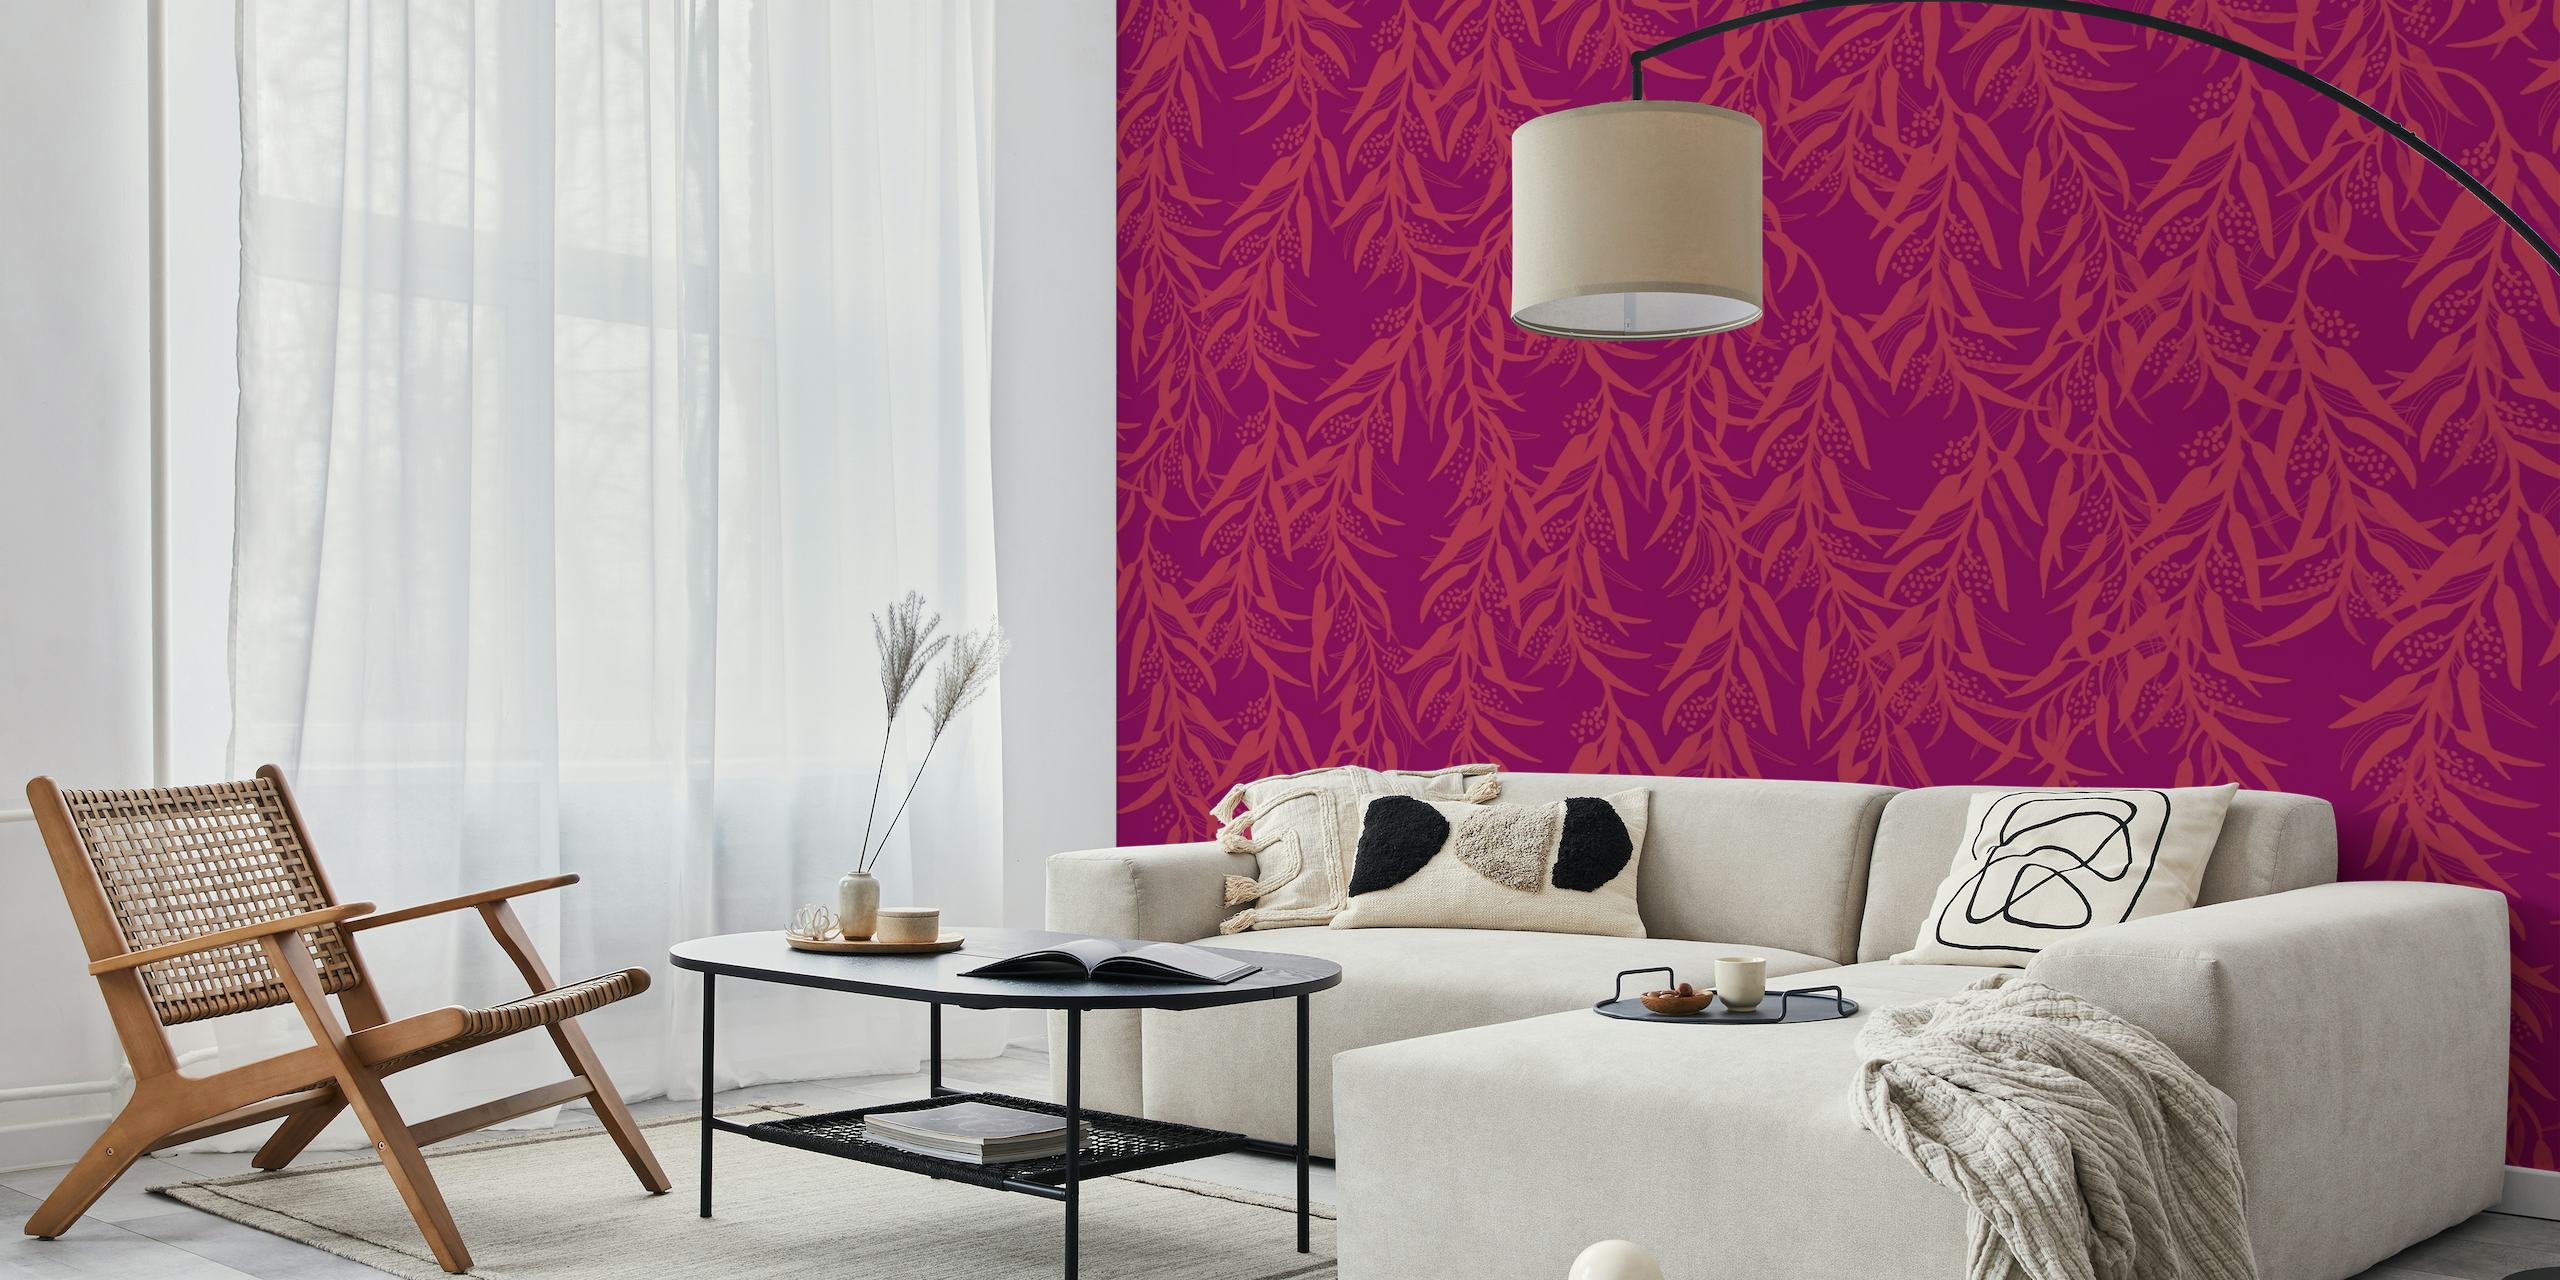 Falling Flora Magenta wall mural with abstract floral patterns